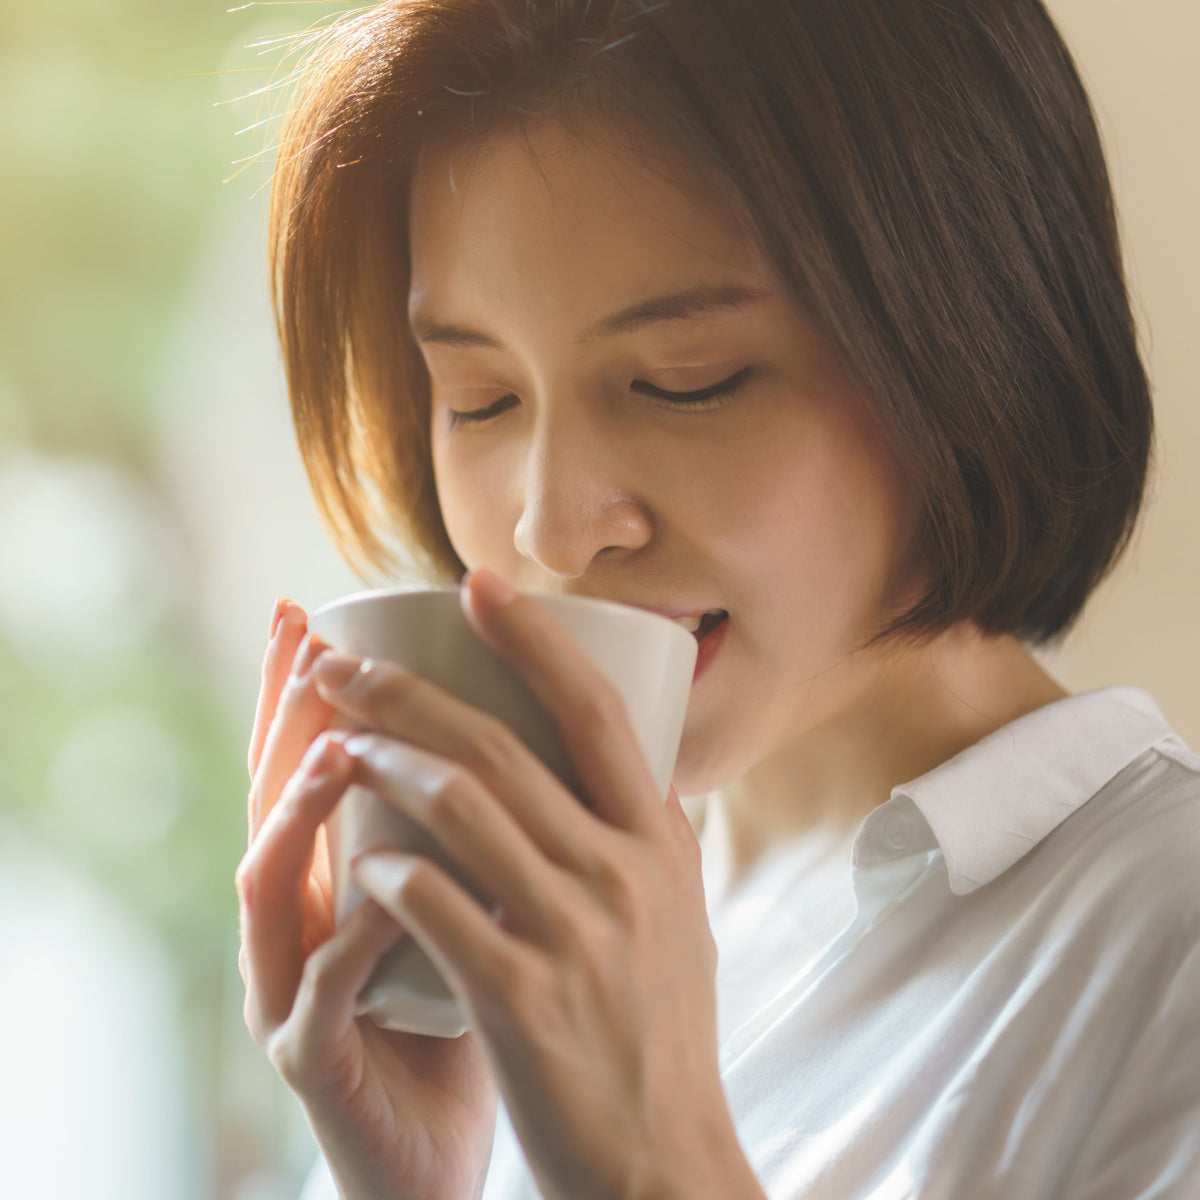 The Relationship Between Coffee and Mental Health